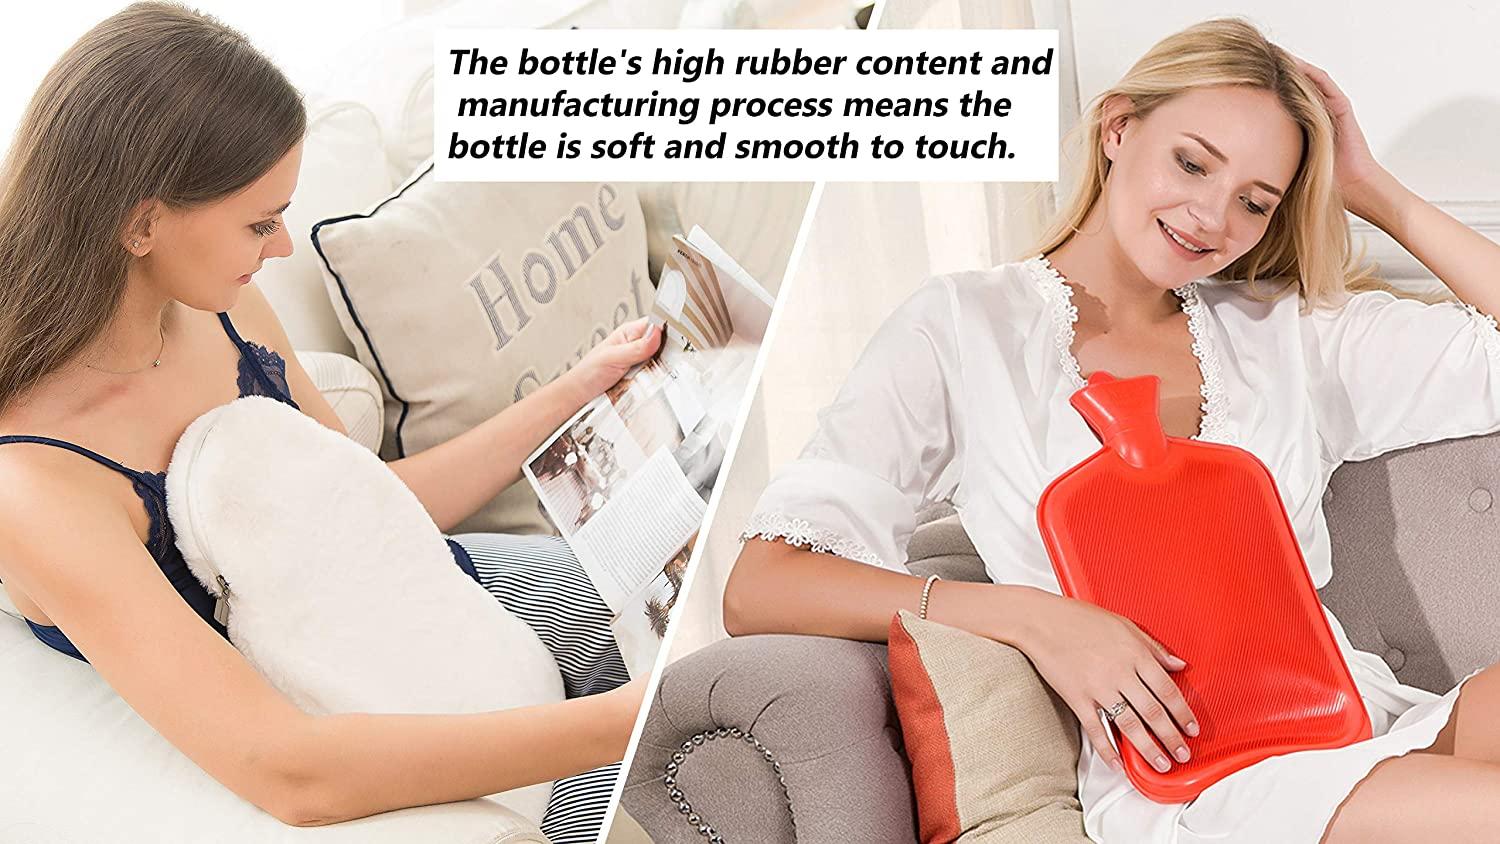 Peterpan Long Rubber Hot Water Bottle with Cover, Hot Water Bag for Pain  Relief, Holds 90 Fl Oz, BPA & Phthalates Free, High Rubber Content Holds  Heat Better, White